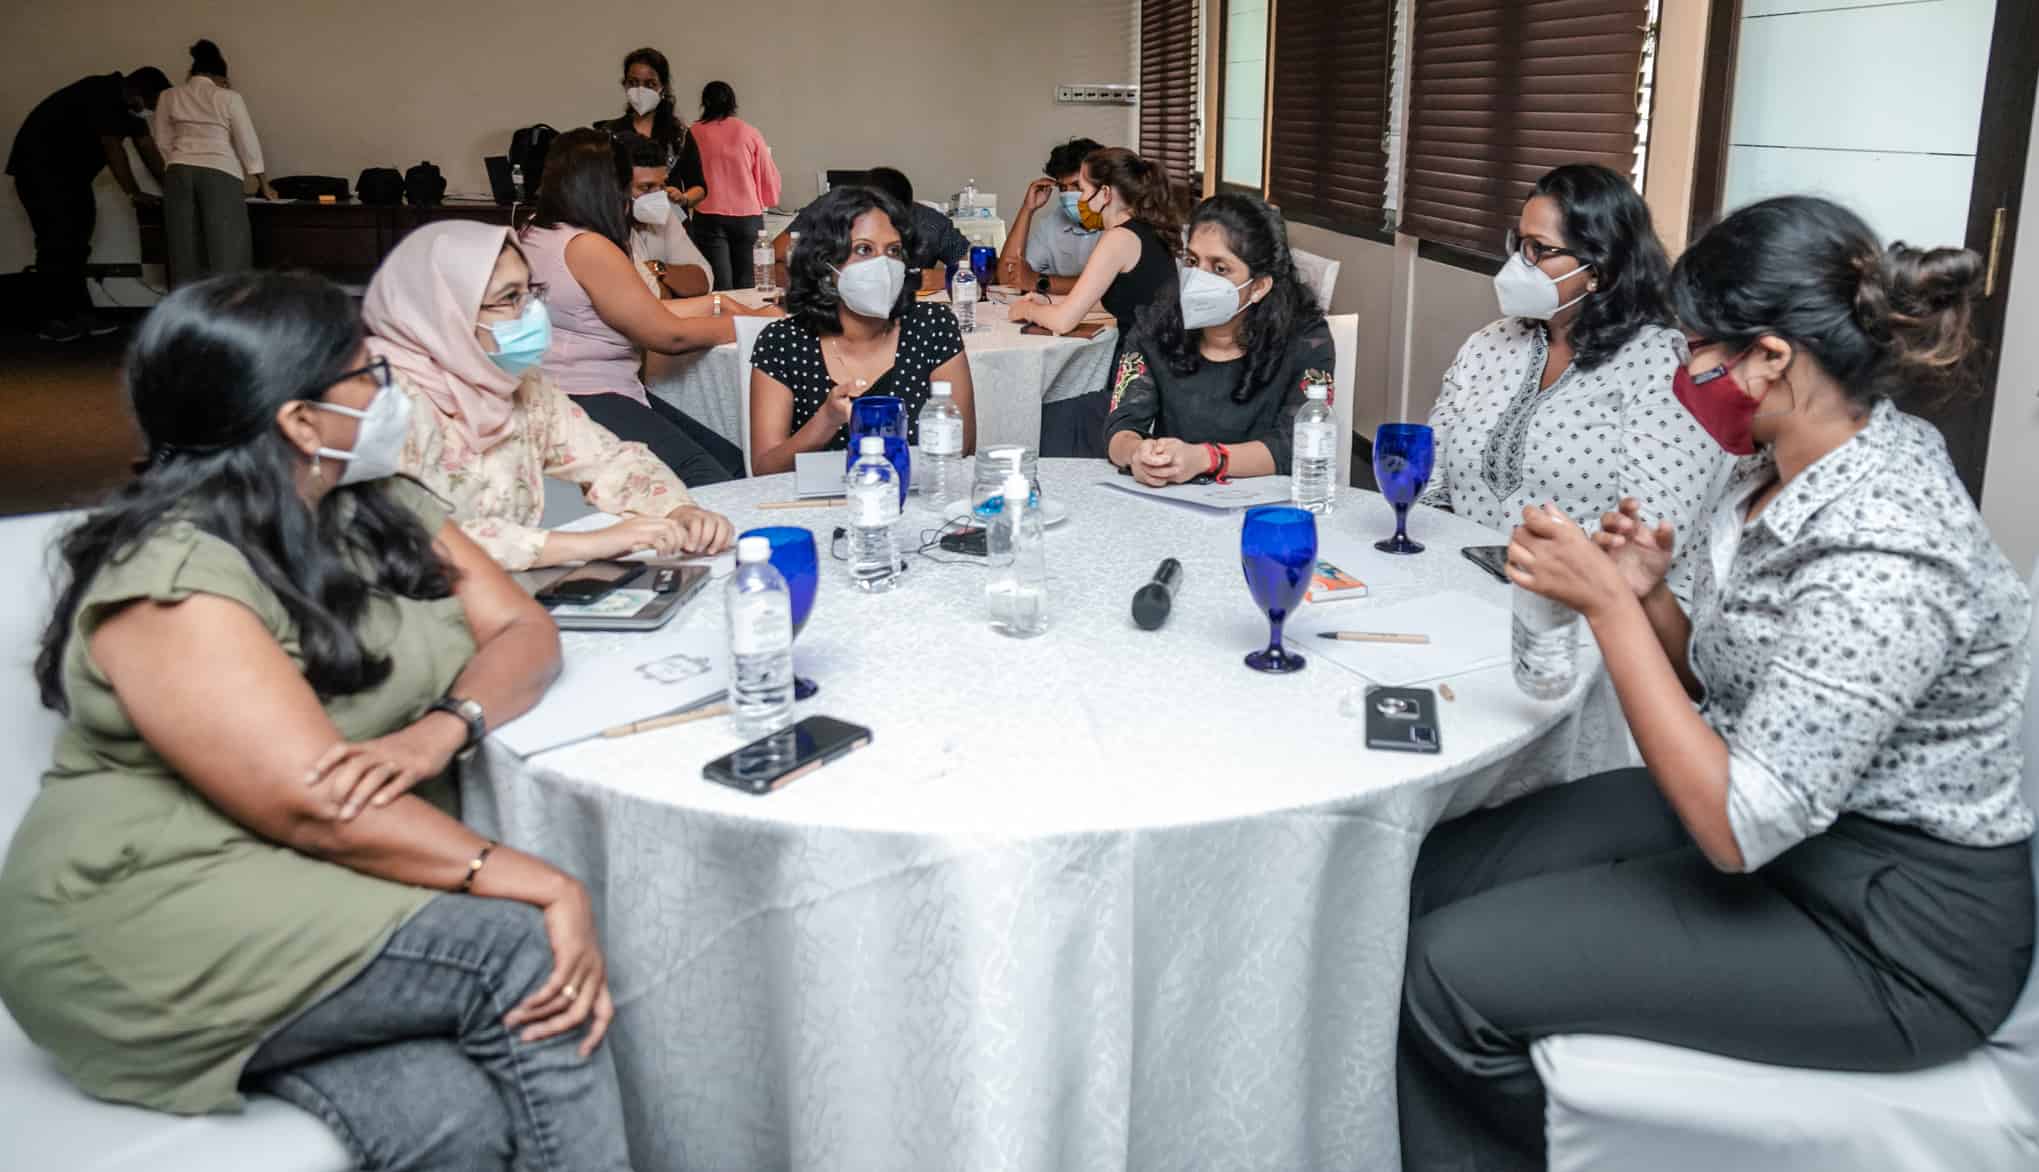 A group of women wearing face masks sit around a table talking.